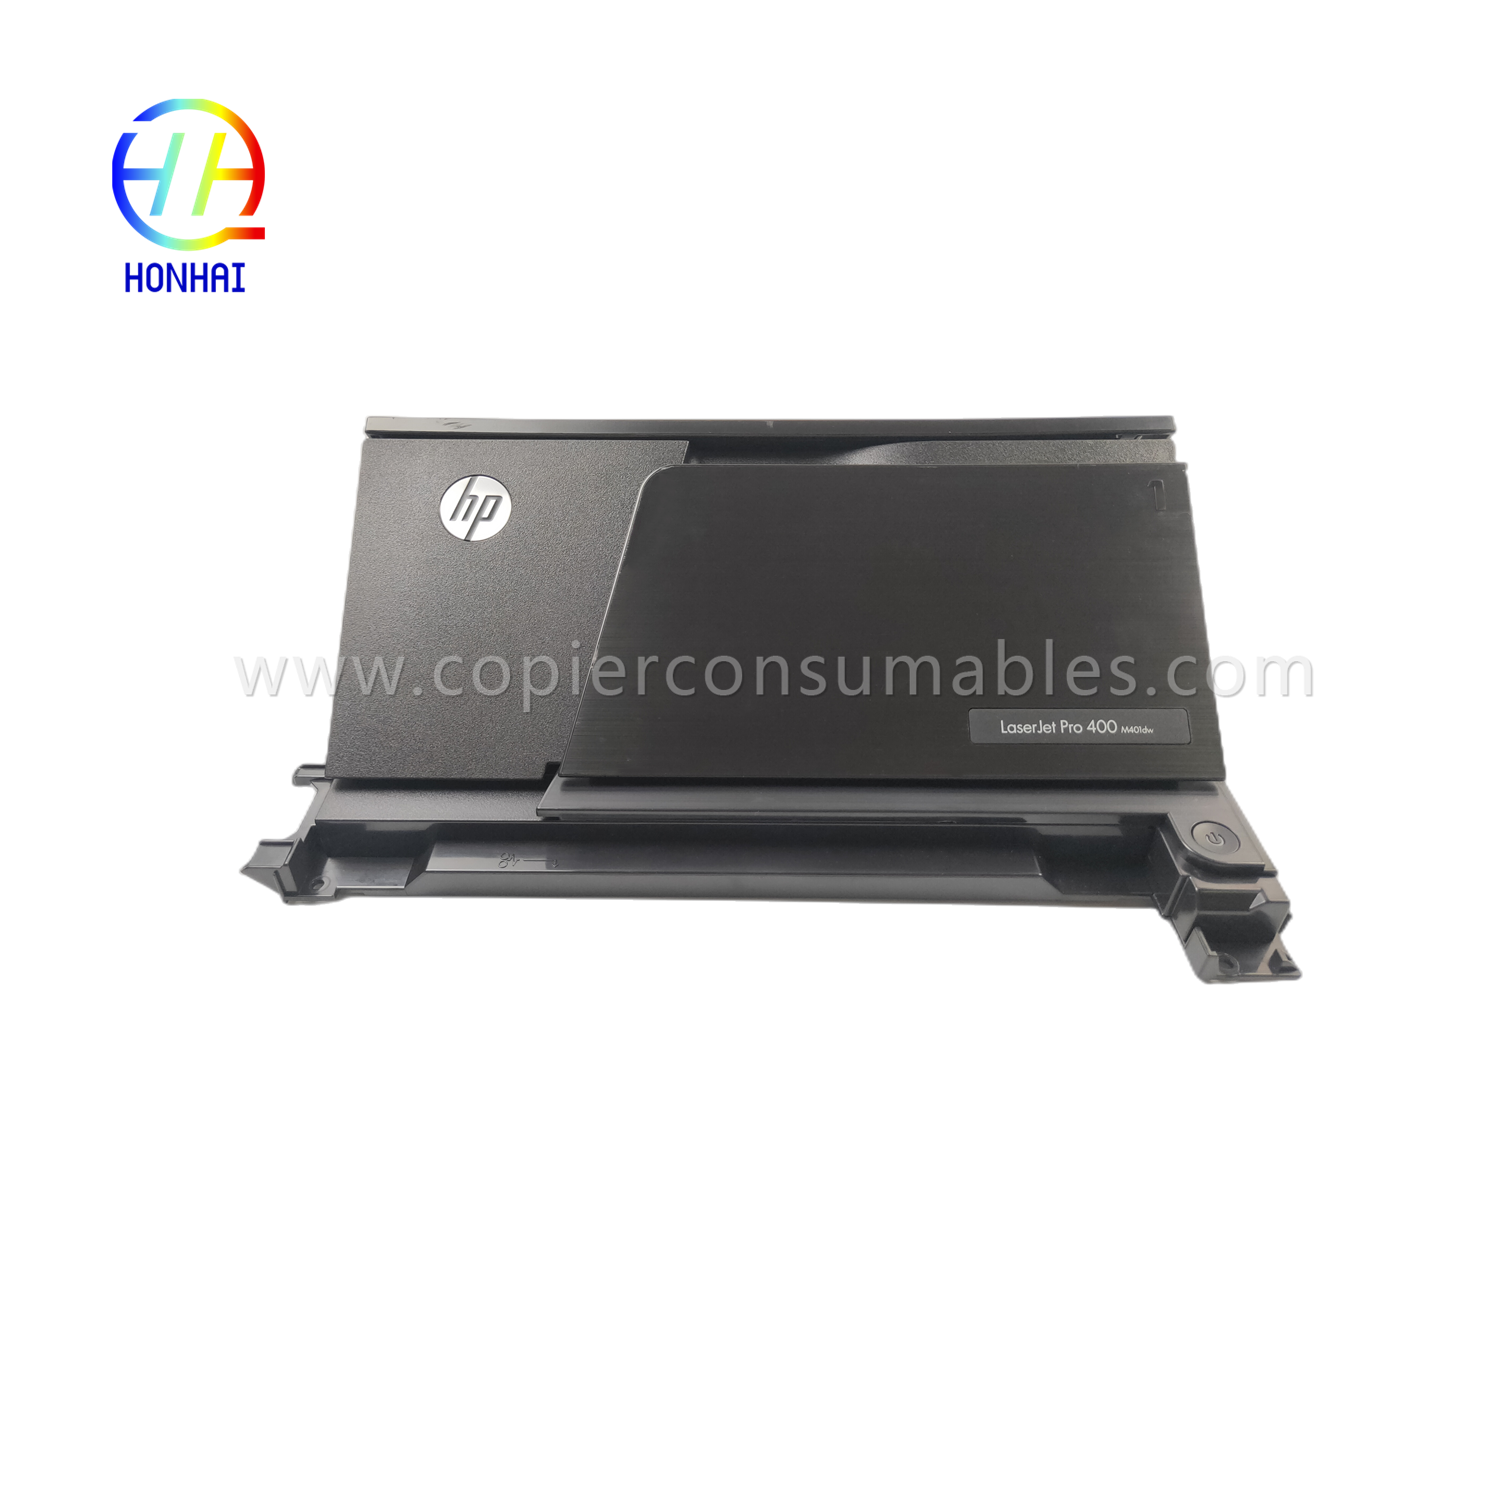 Front Door for HP pro400 M401 HP401dne 401D First Tray Manual Feeder Front Cover